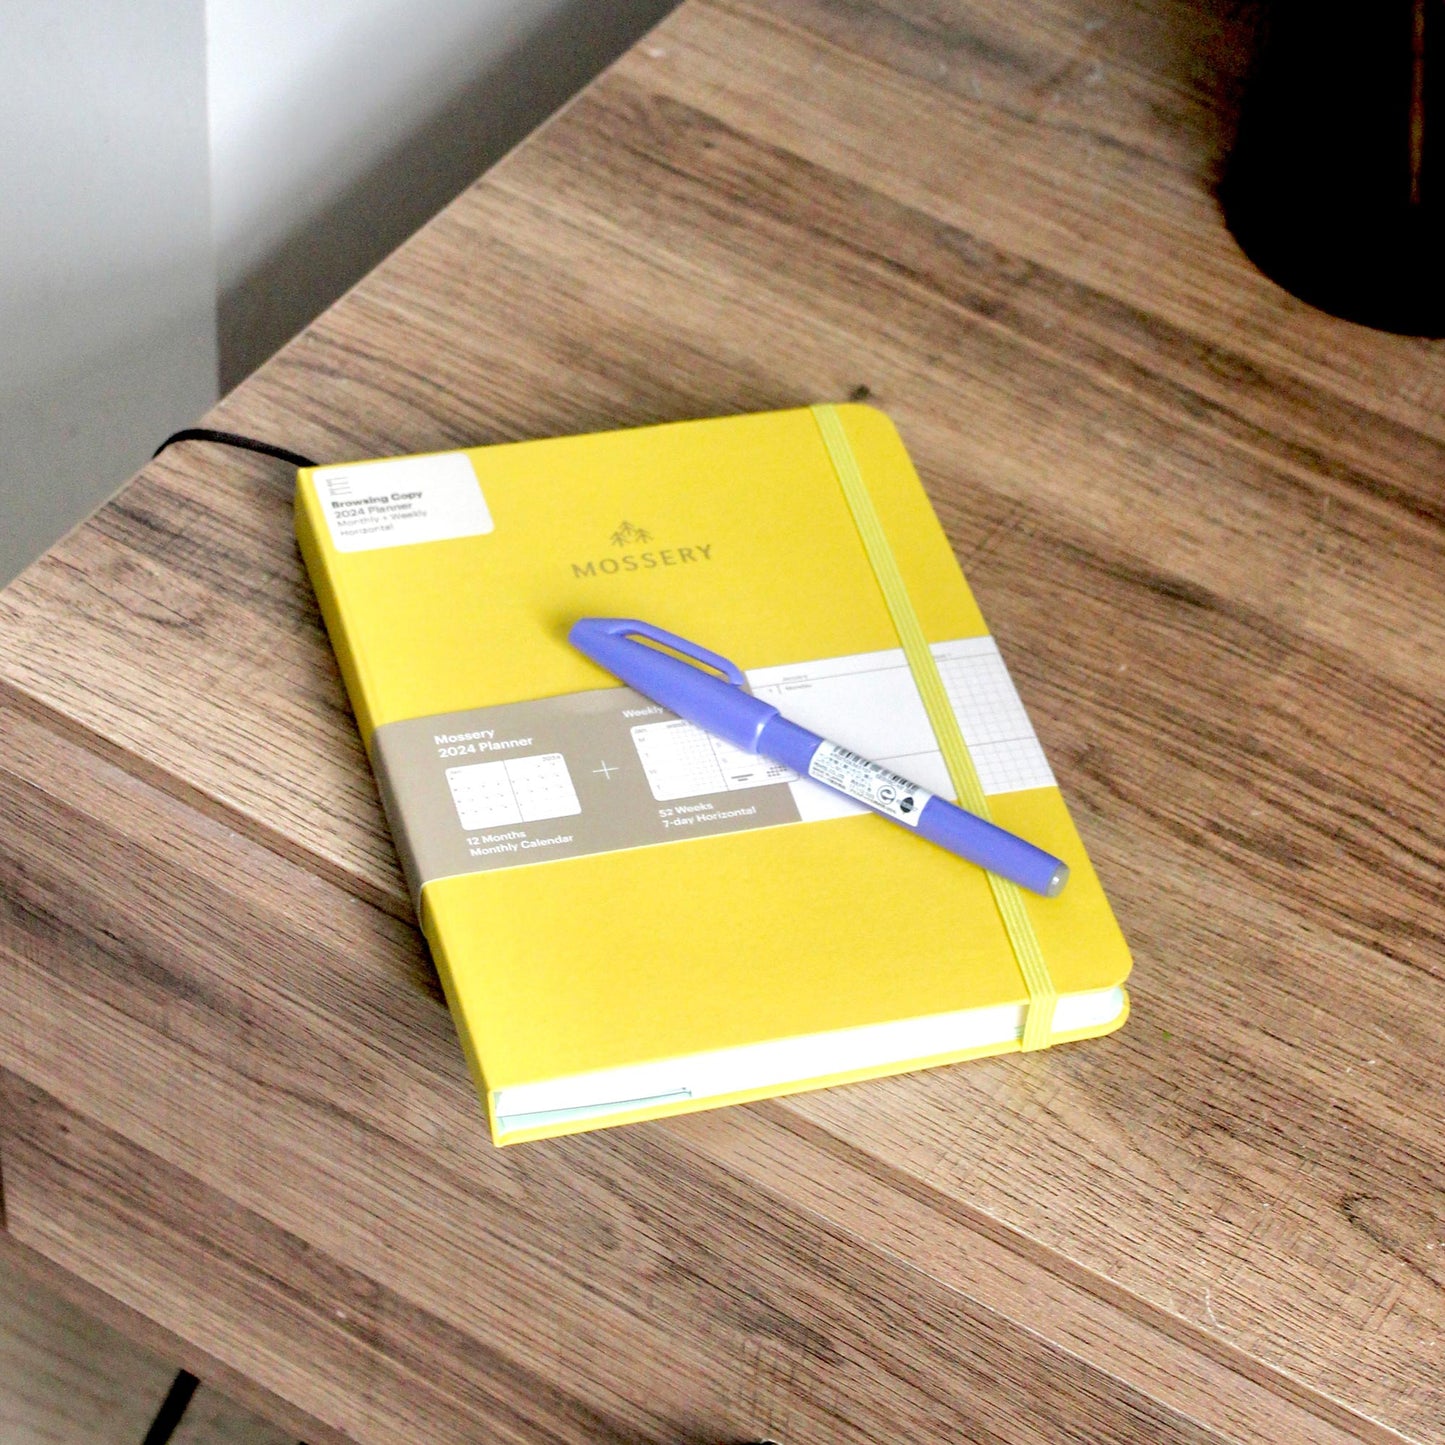 Refillable Notebook - Sunshine Yellow / Ruled Pages